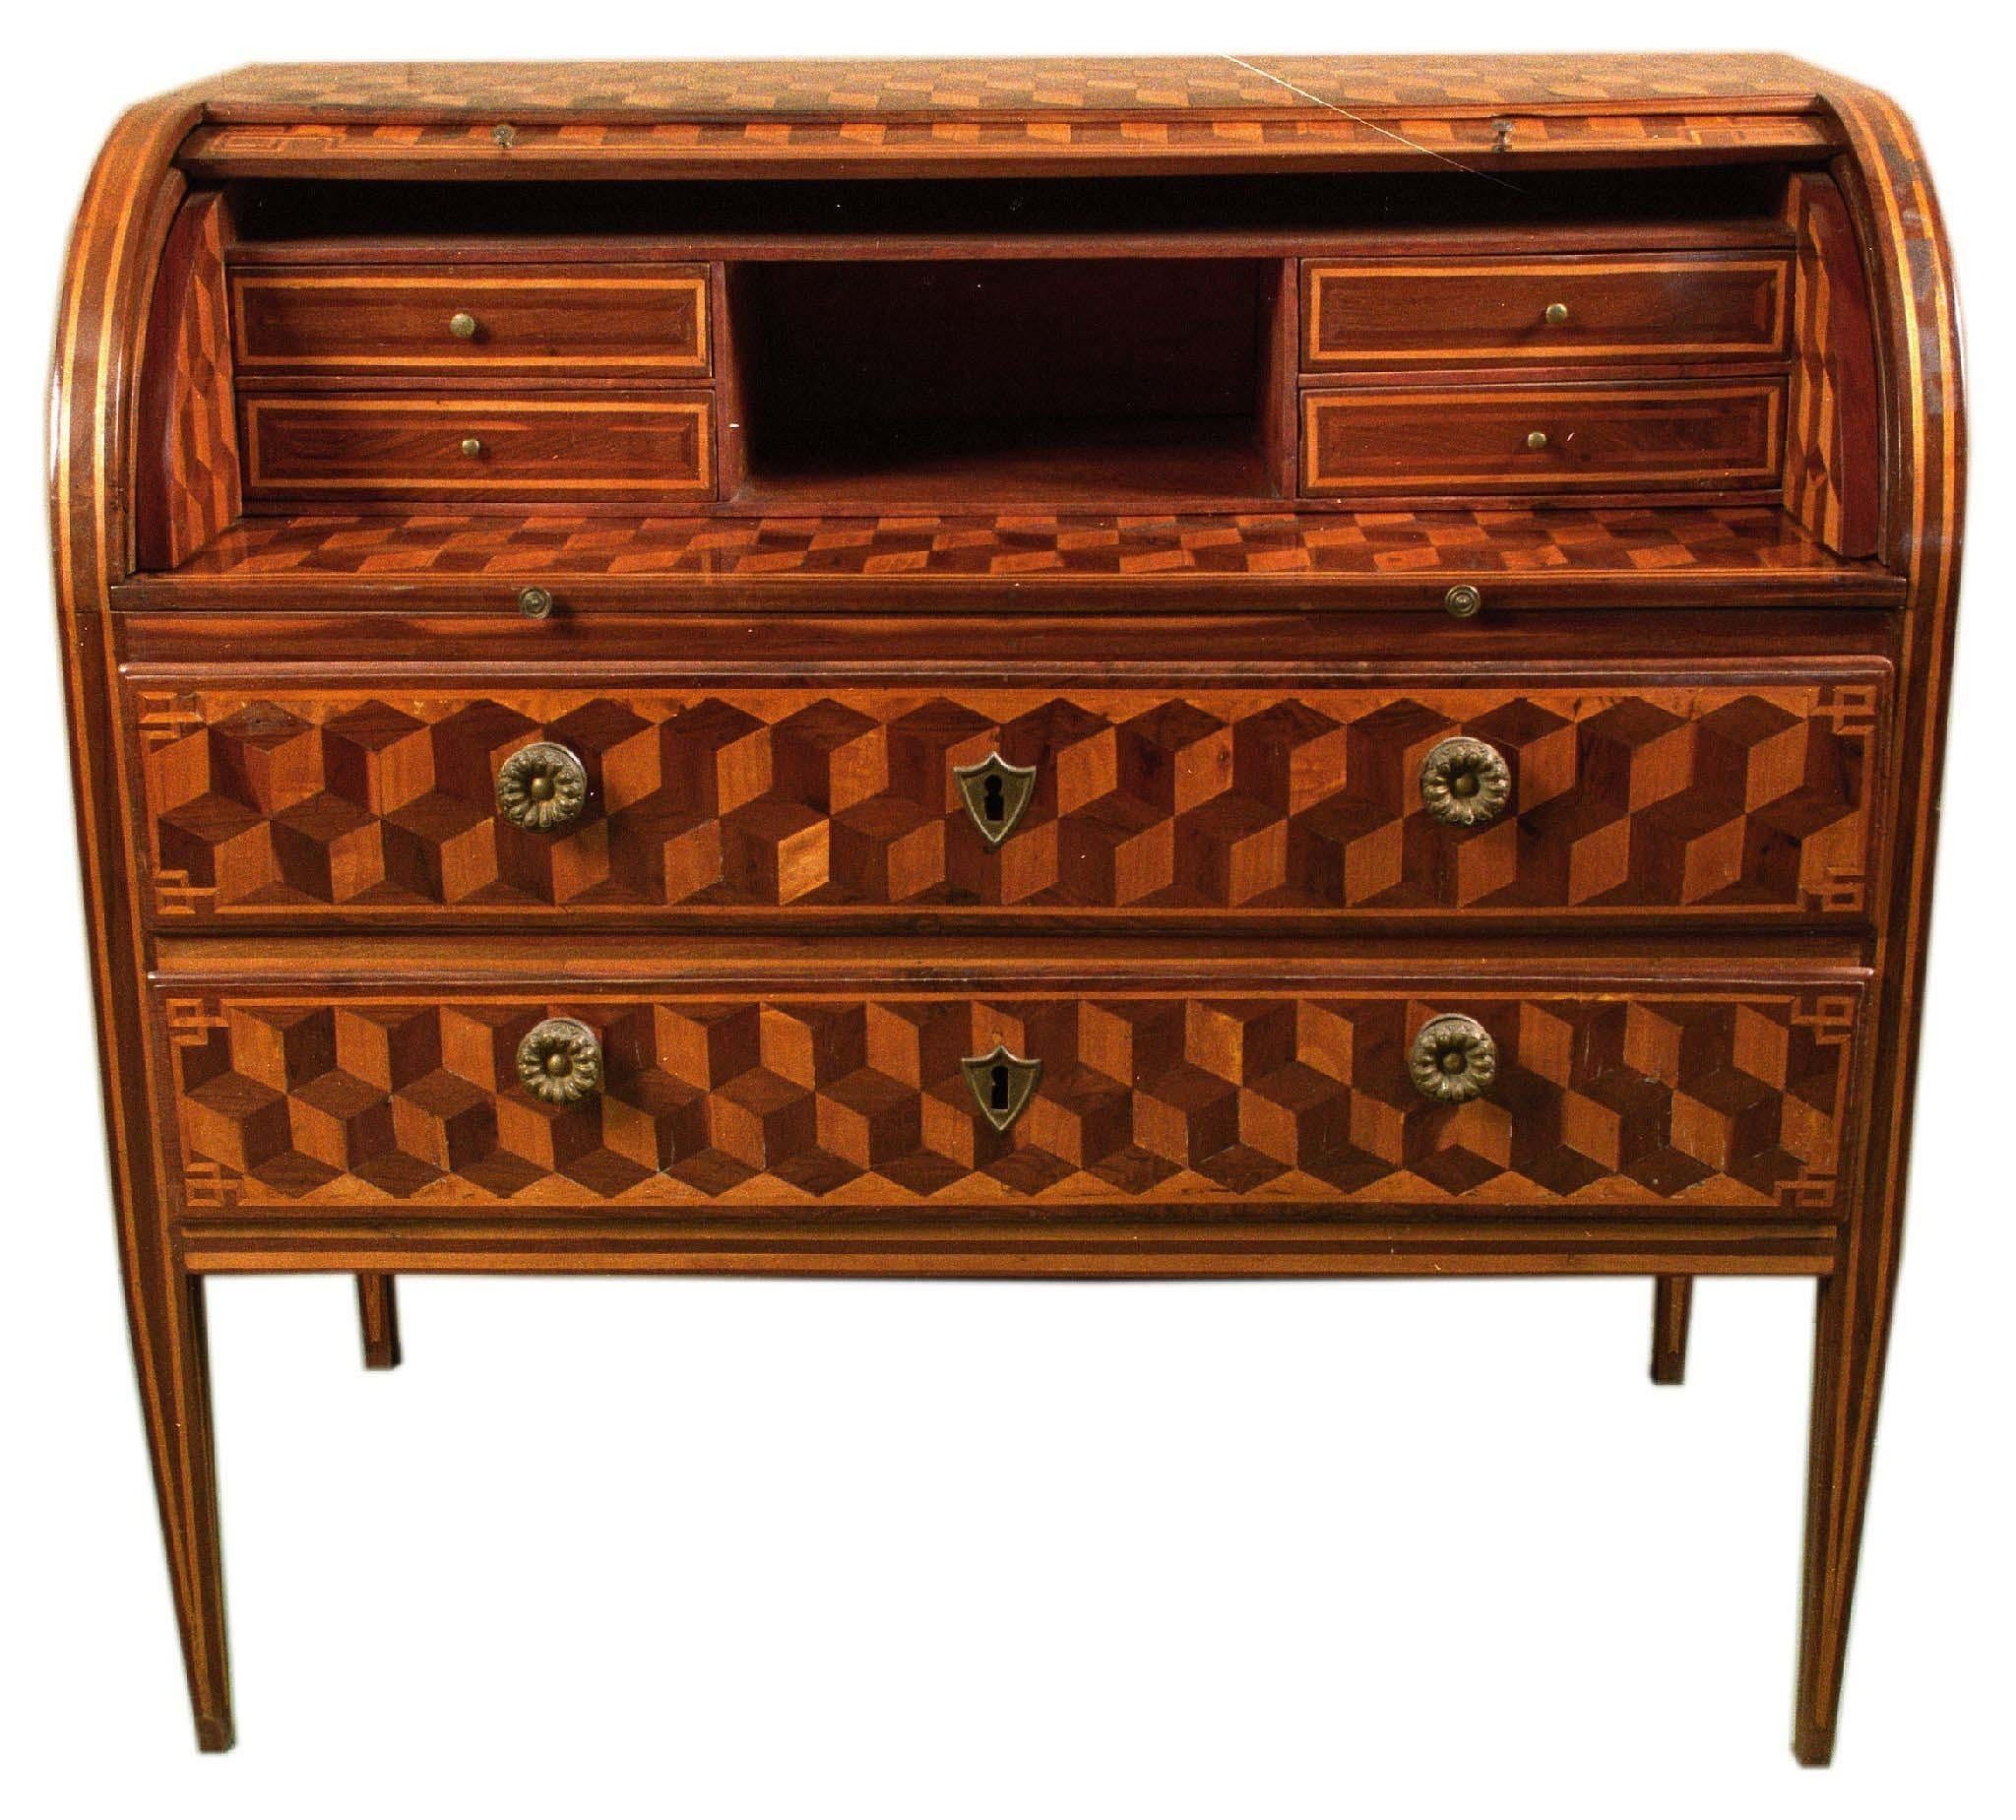 Roller desk in walnut and maple. Inside the roller, a pull-out drawer desk top, a central open compartment and 4 drawers. At the base of the roller two drawers, spiked legs.
Origin: Northern Italy.
Piedmont. period: second half 1700
Dimensions: